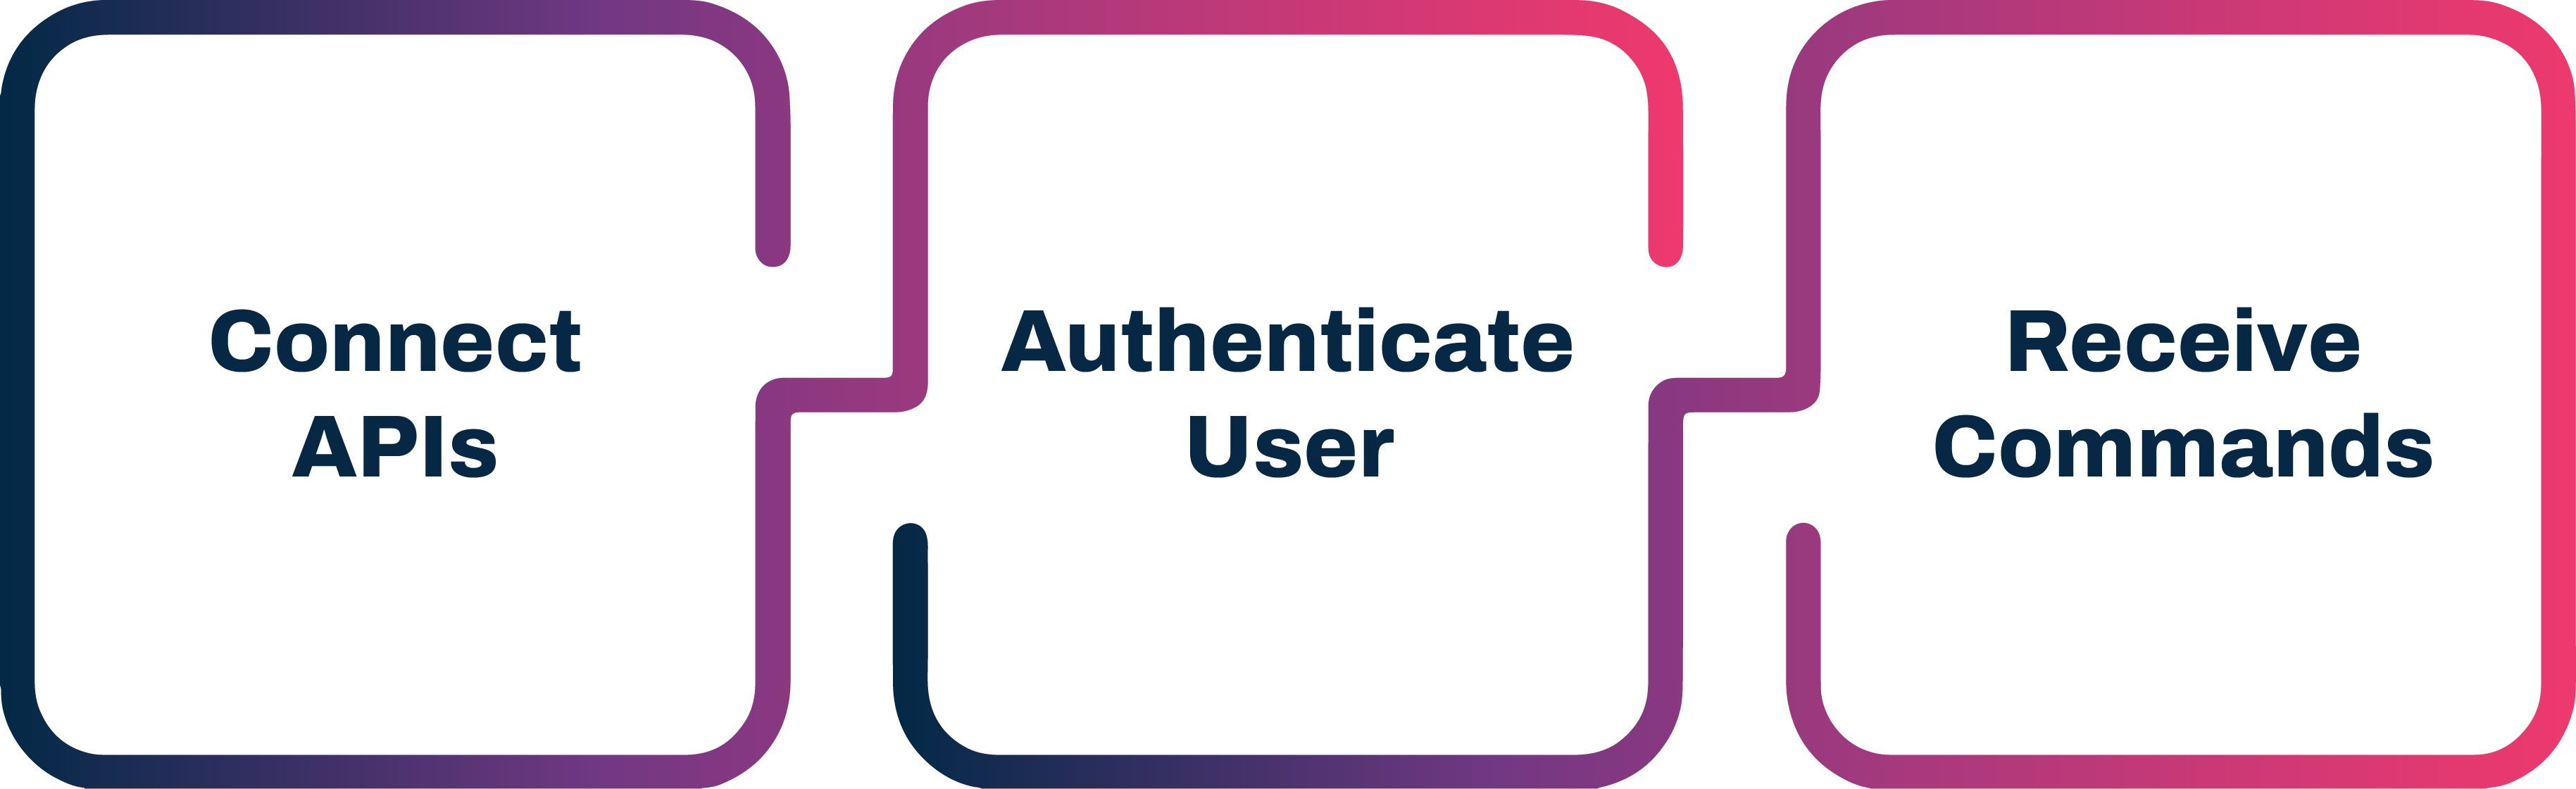 * Receive Commands<br />
* Authenticate User<br />
* Connect APIs